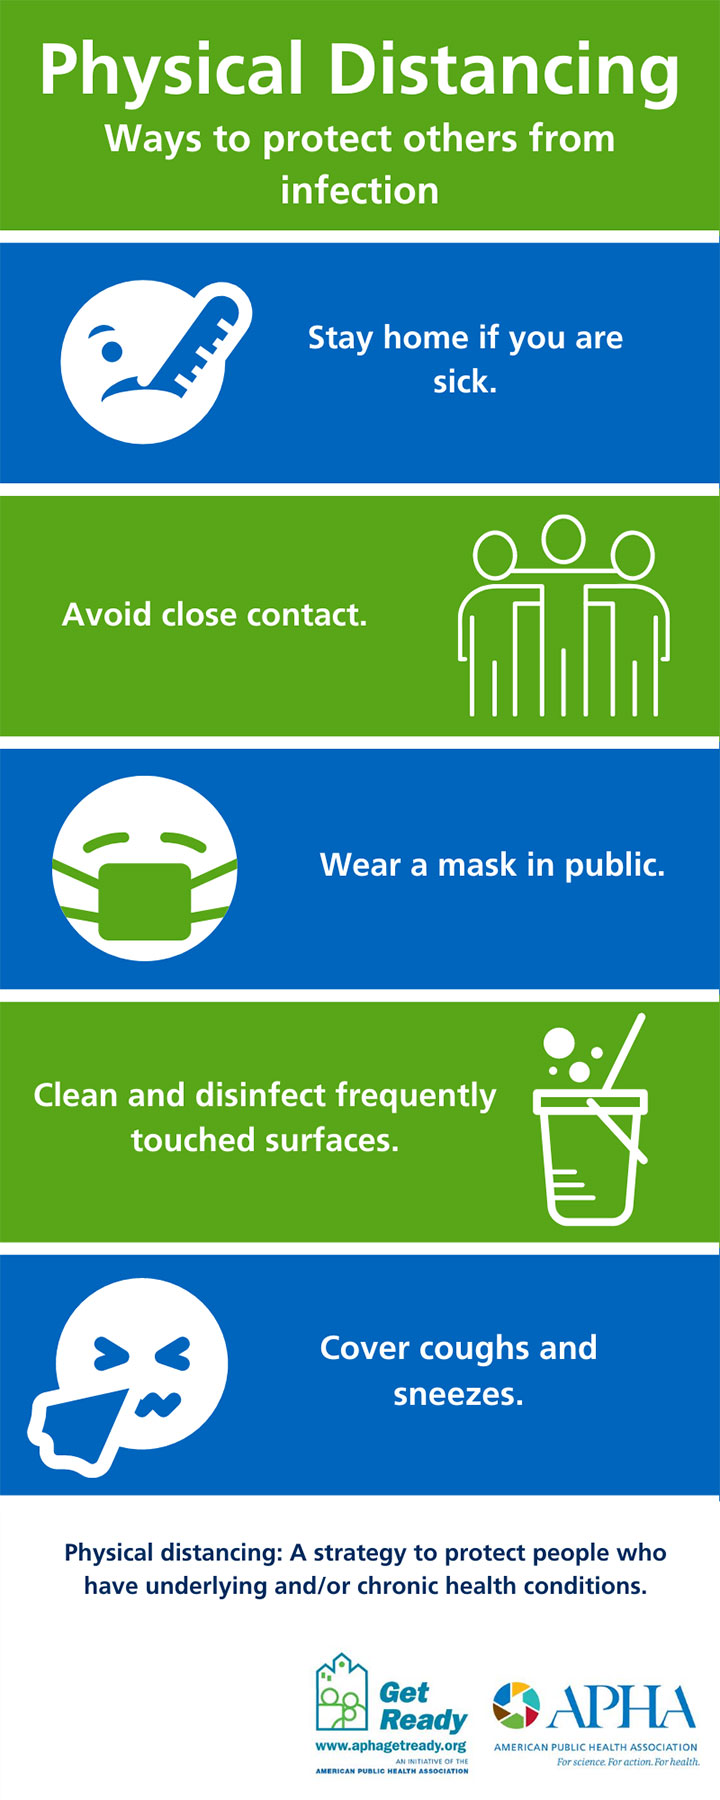 Ways to protect others: Stay home if you're sick, wear a mask, avoid close contact, clean surfaces freqeuently